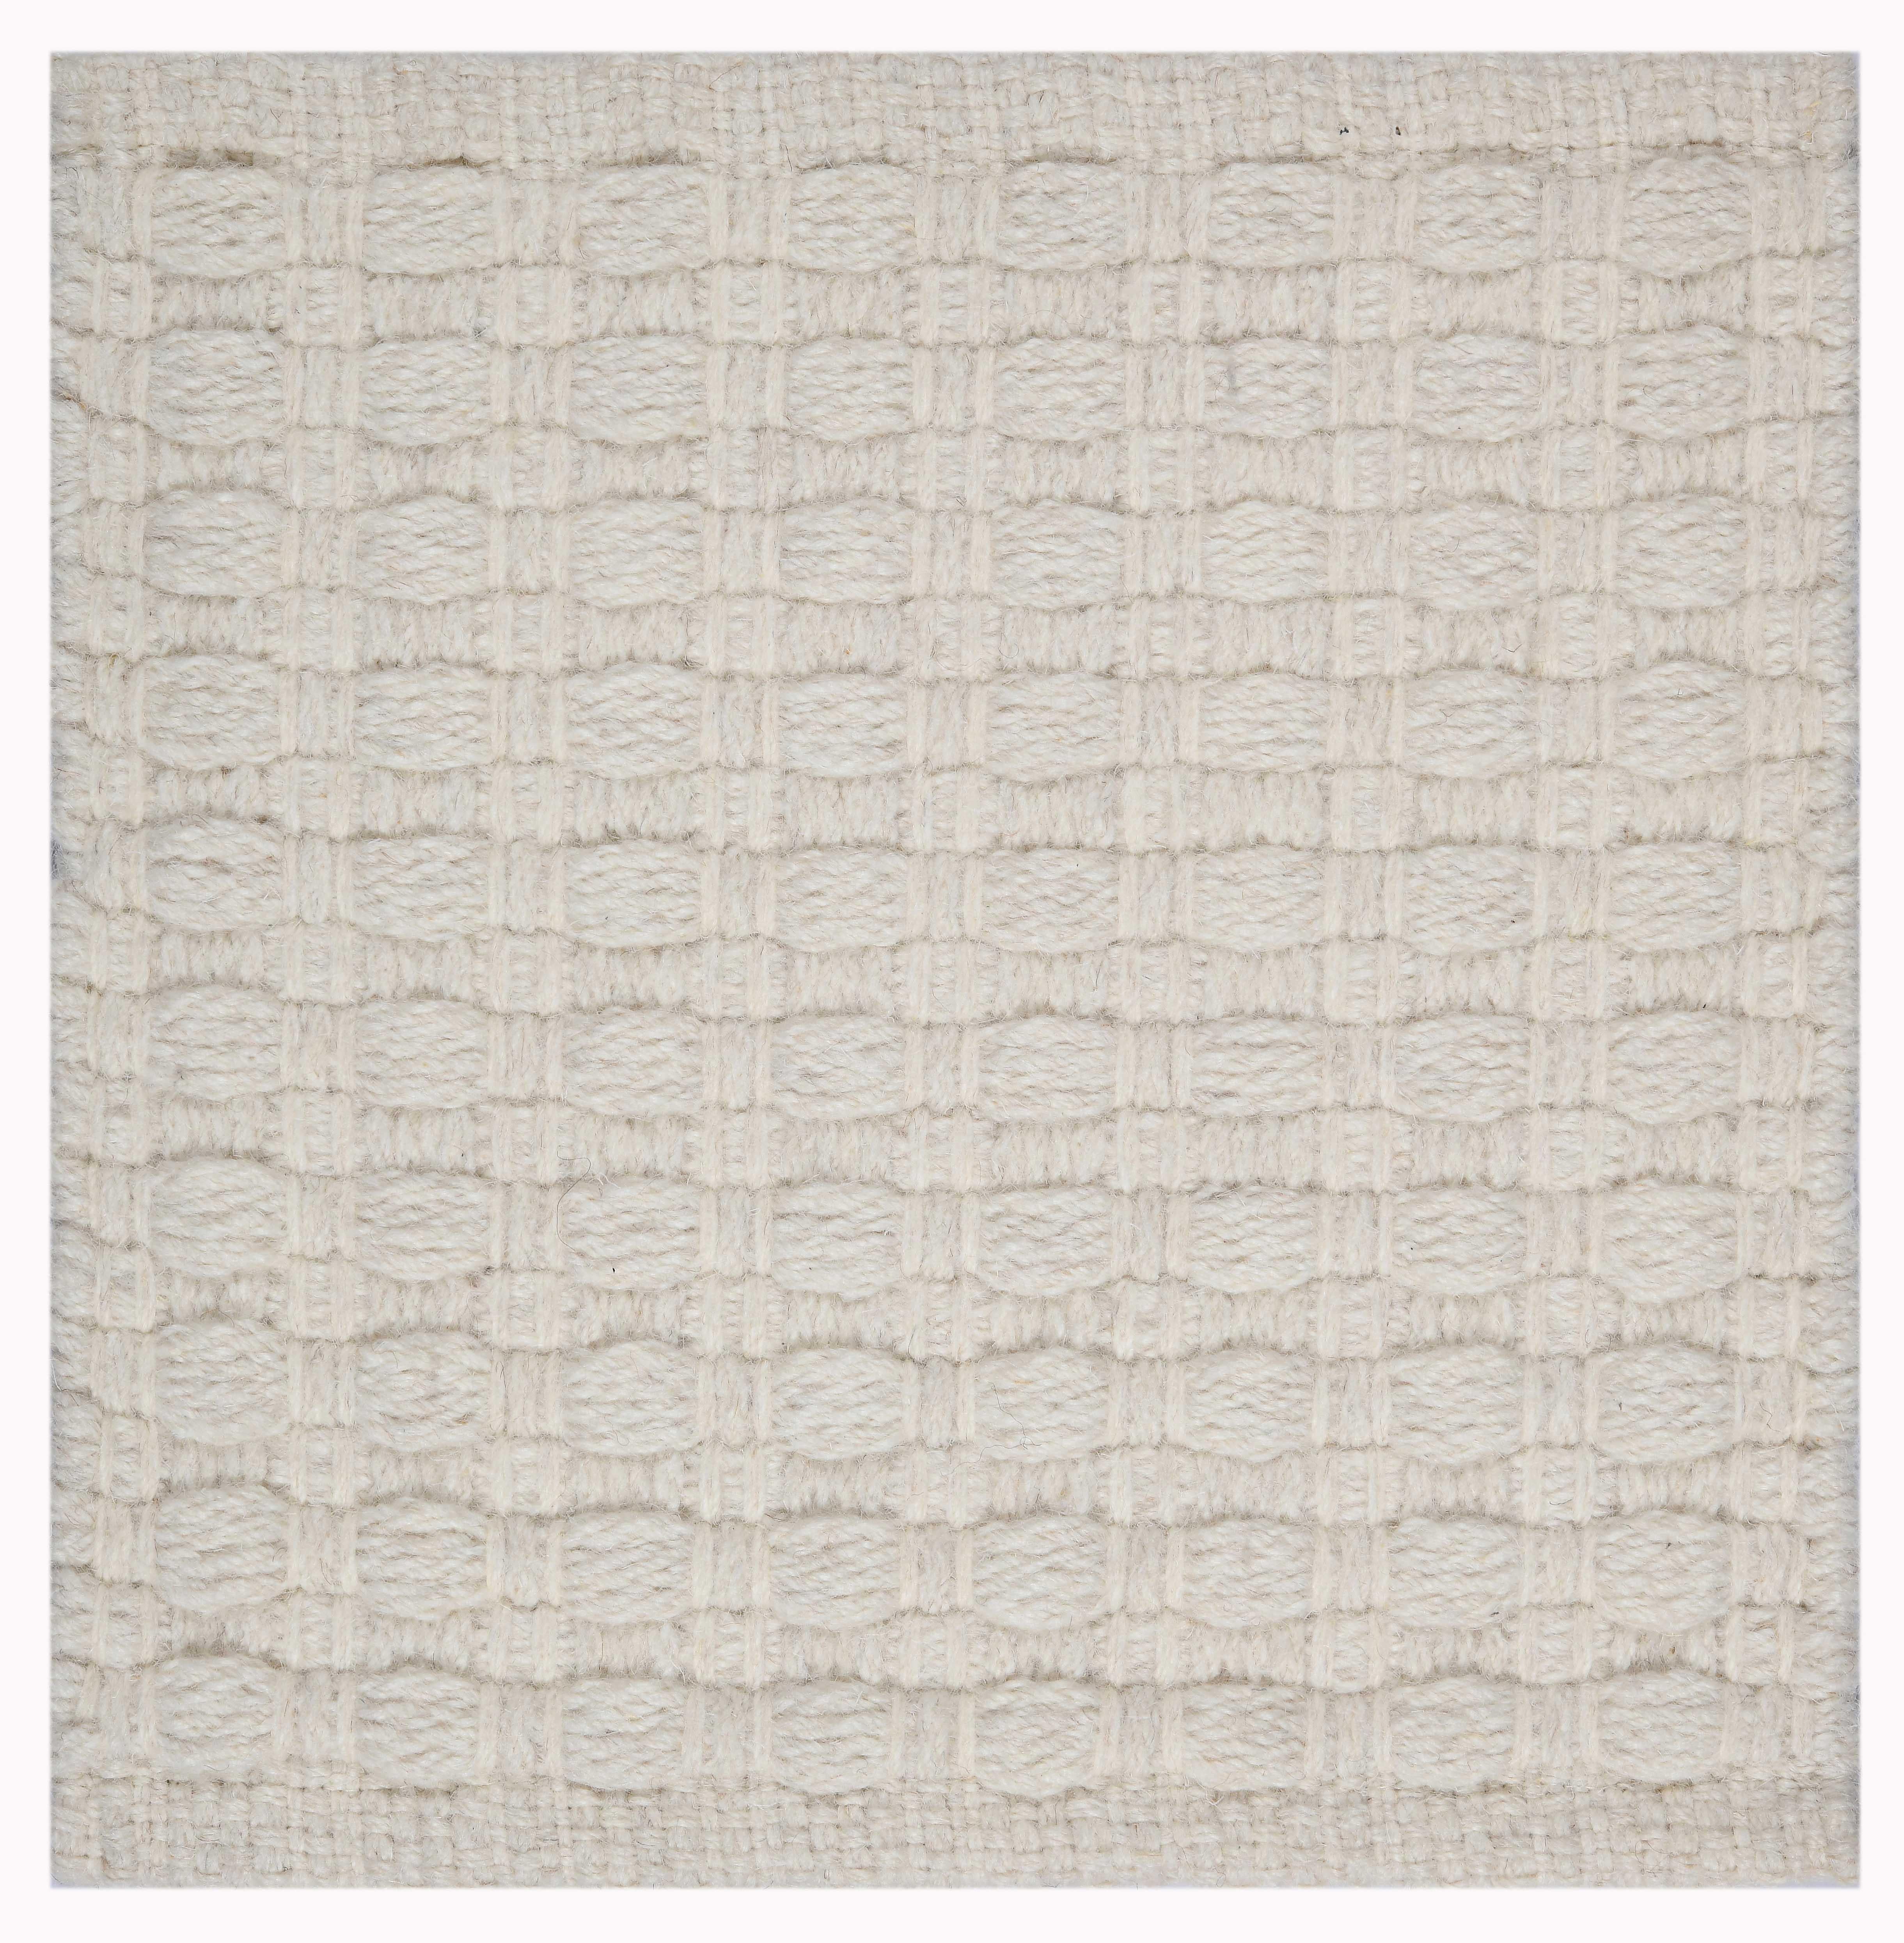 Contemporary Una, Ecru, Handwoven Face 60% Undyed NZ Wool, 40% Undyed MED Wool, 8' x 10' For Sale